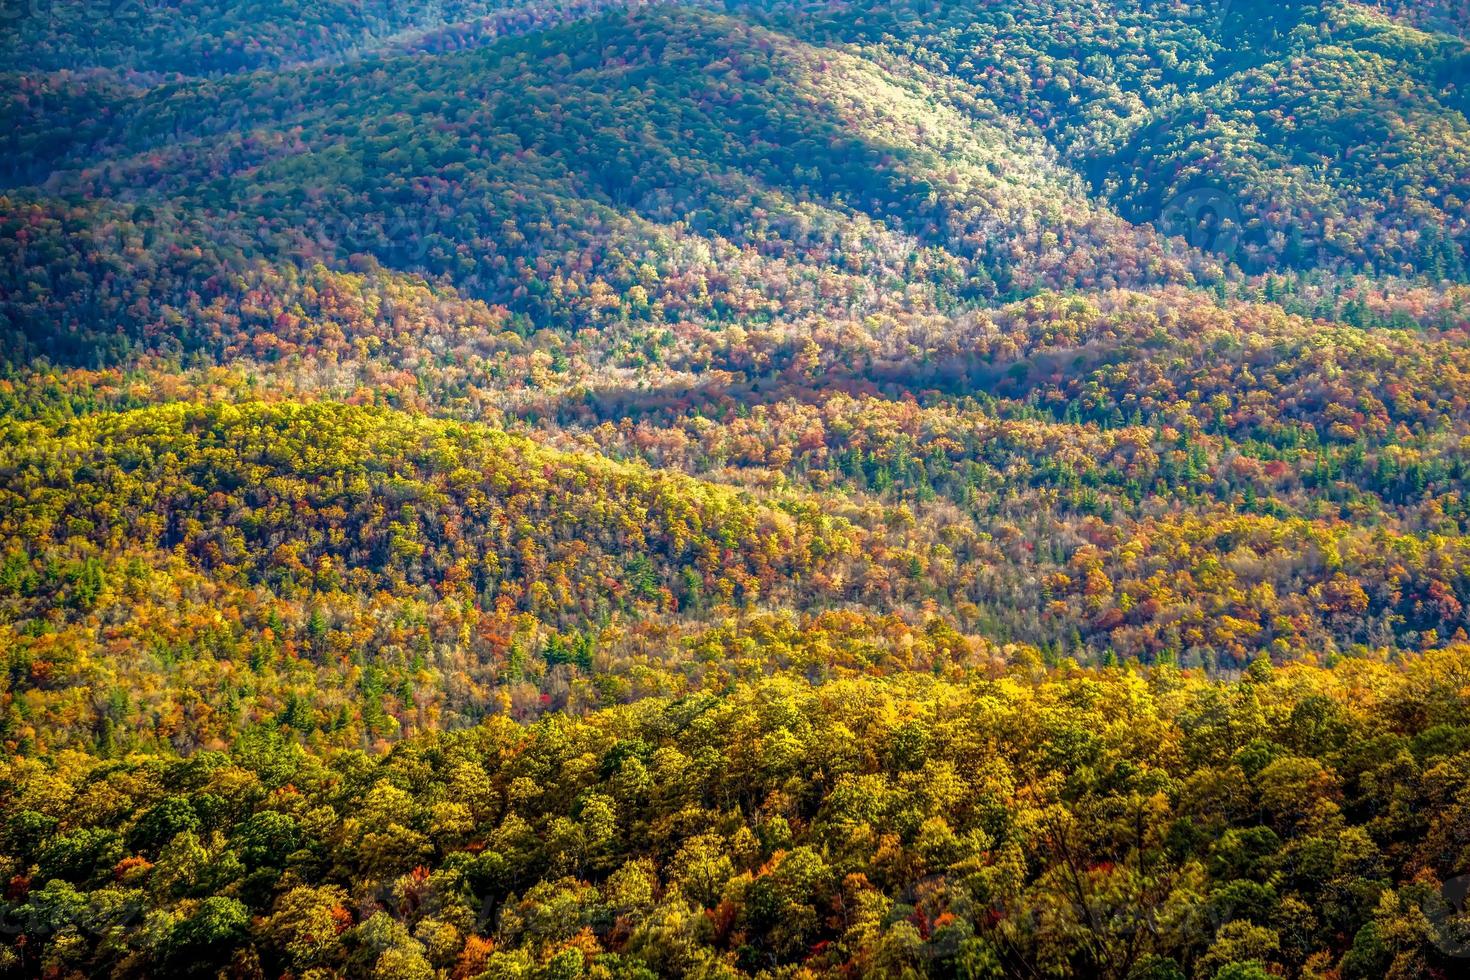 blue ridge and smoky mountains changing color in fall photo